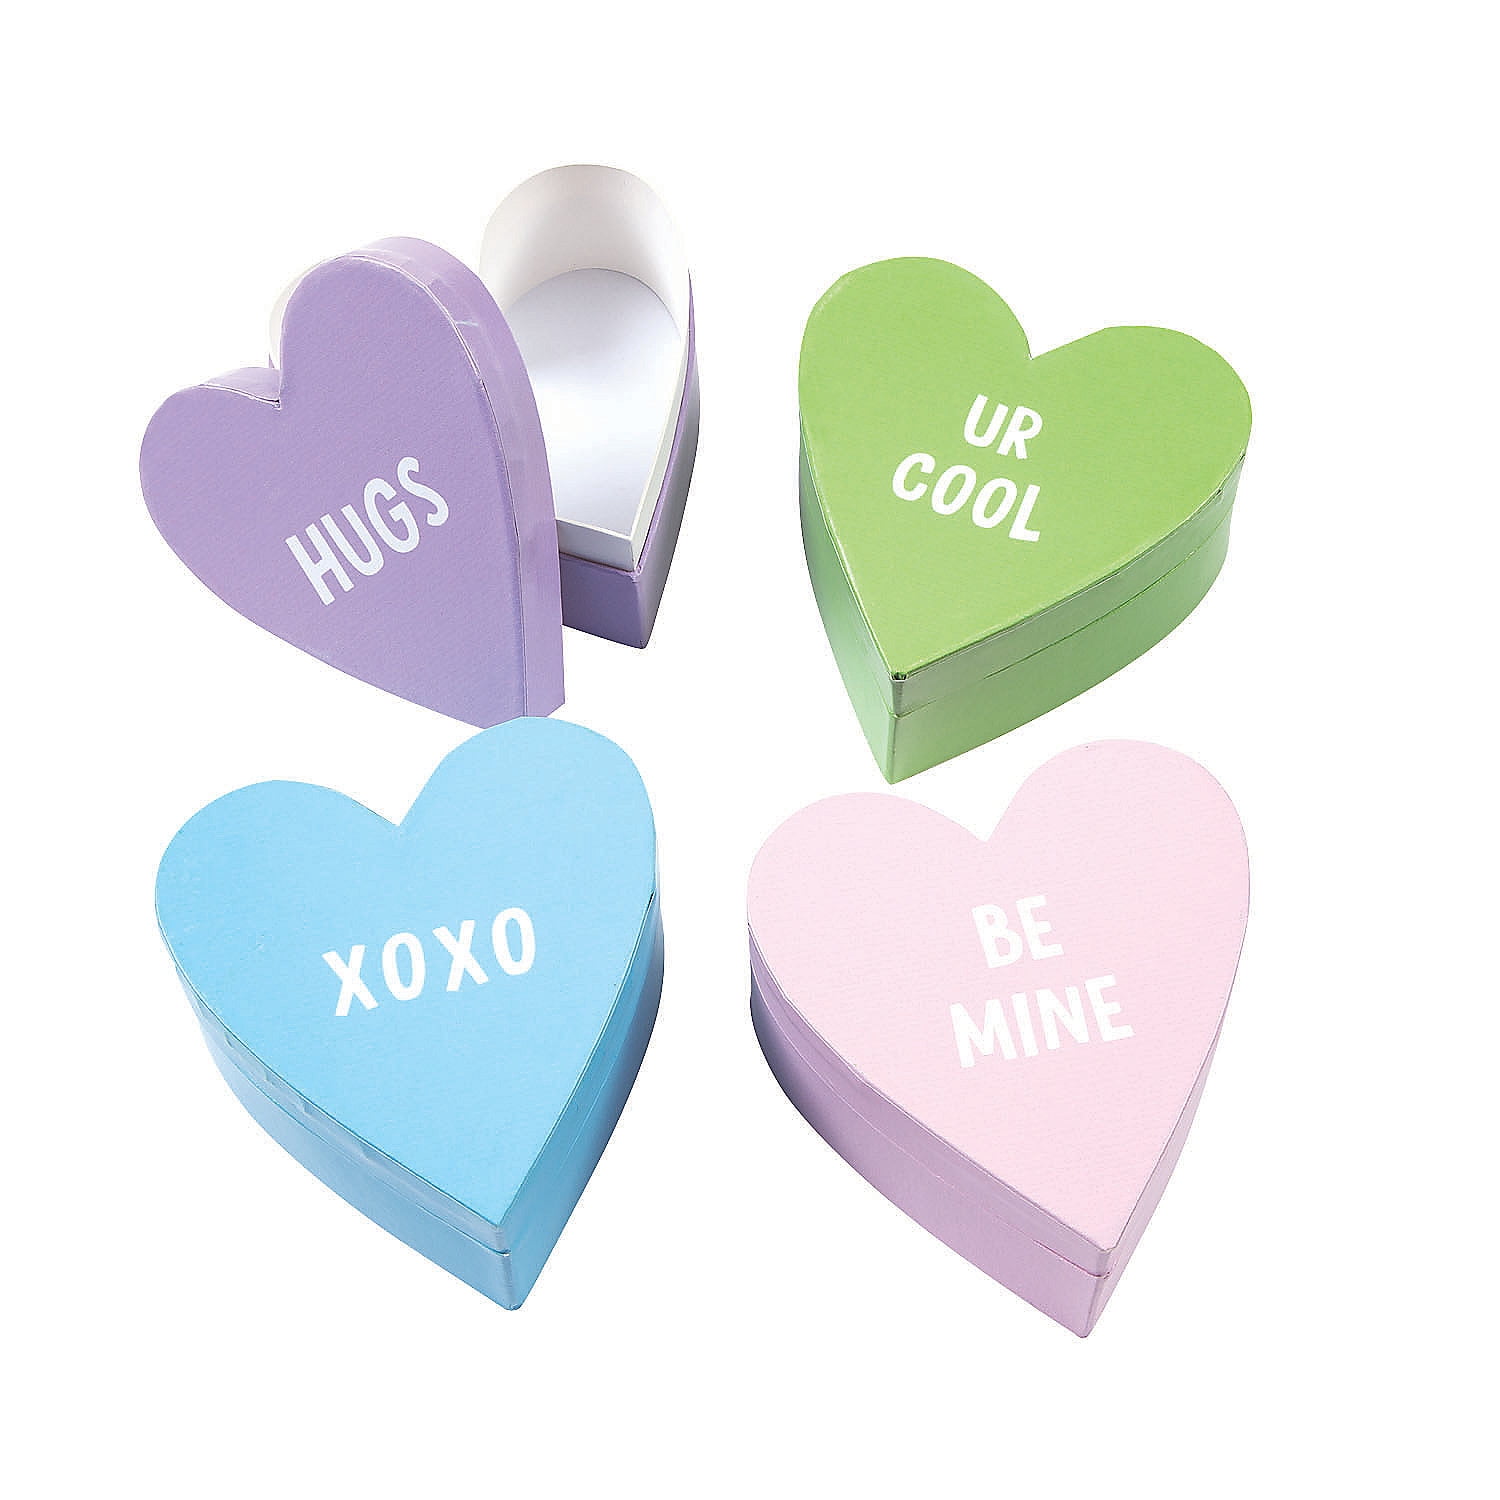 Conversation Heart Shaped Treat Boxes - Party Supplies - 12 Pieces